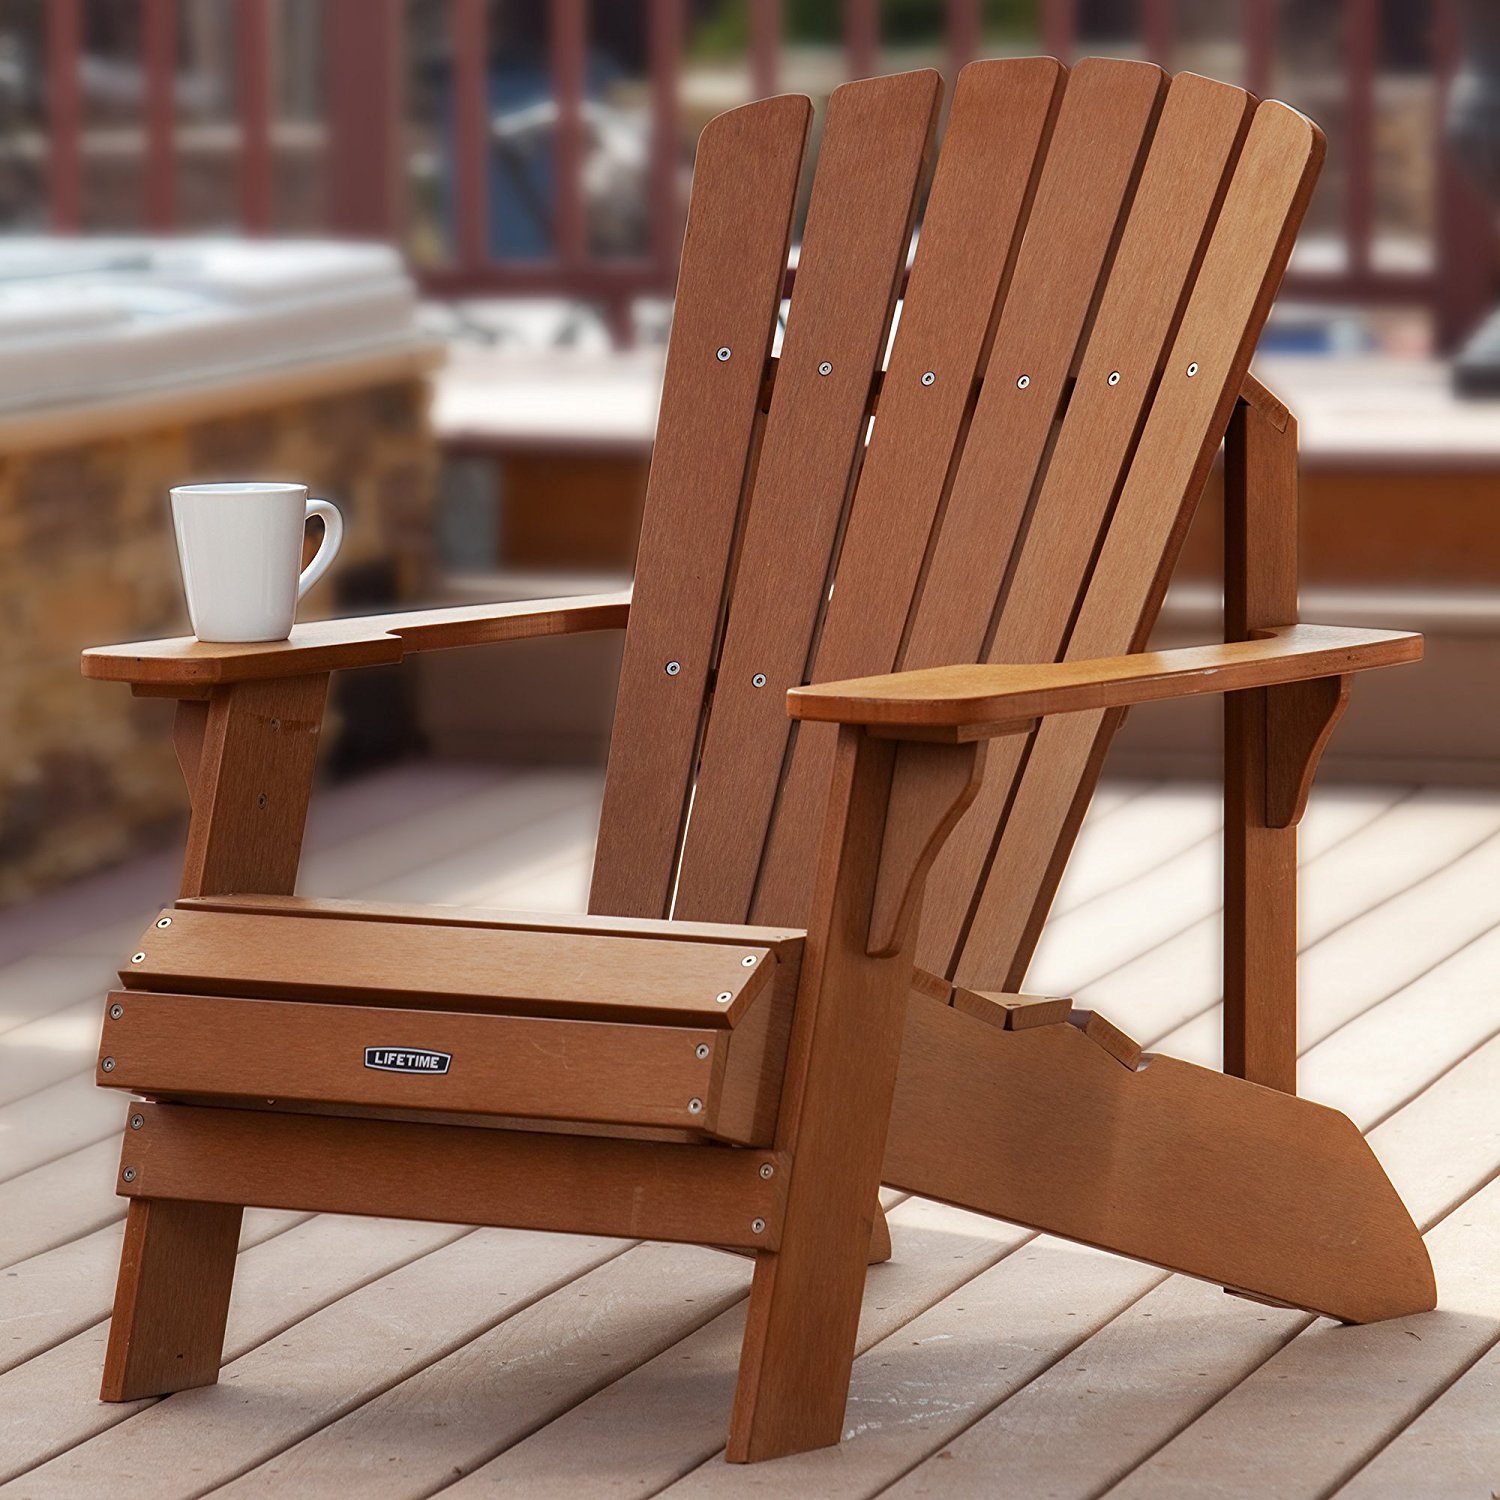 Poly Resin Adirondack Chairs. Reviews and Buyer's Guide ...